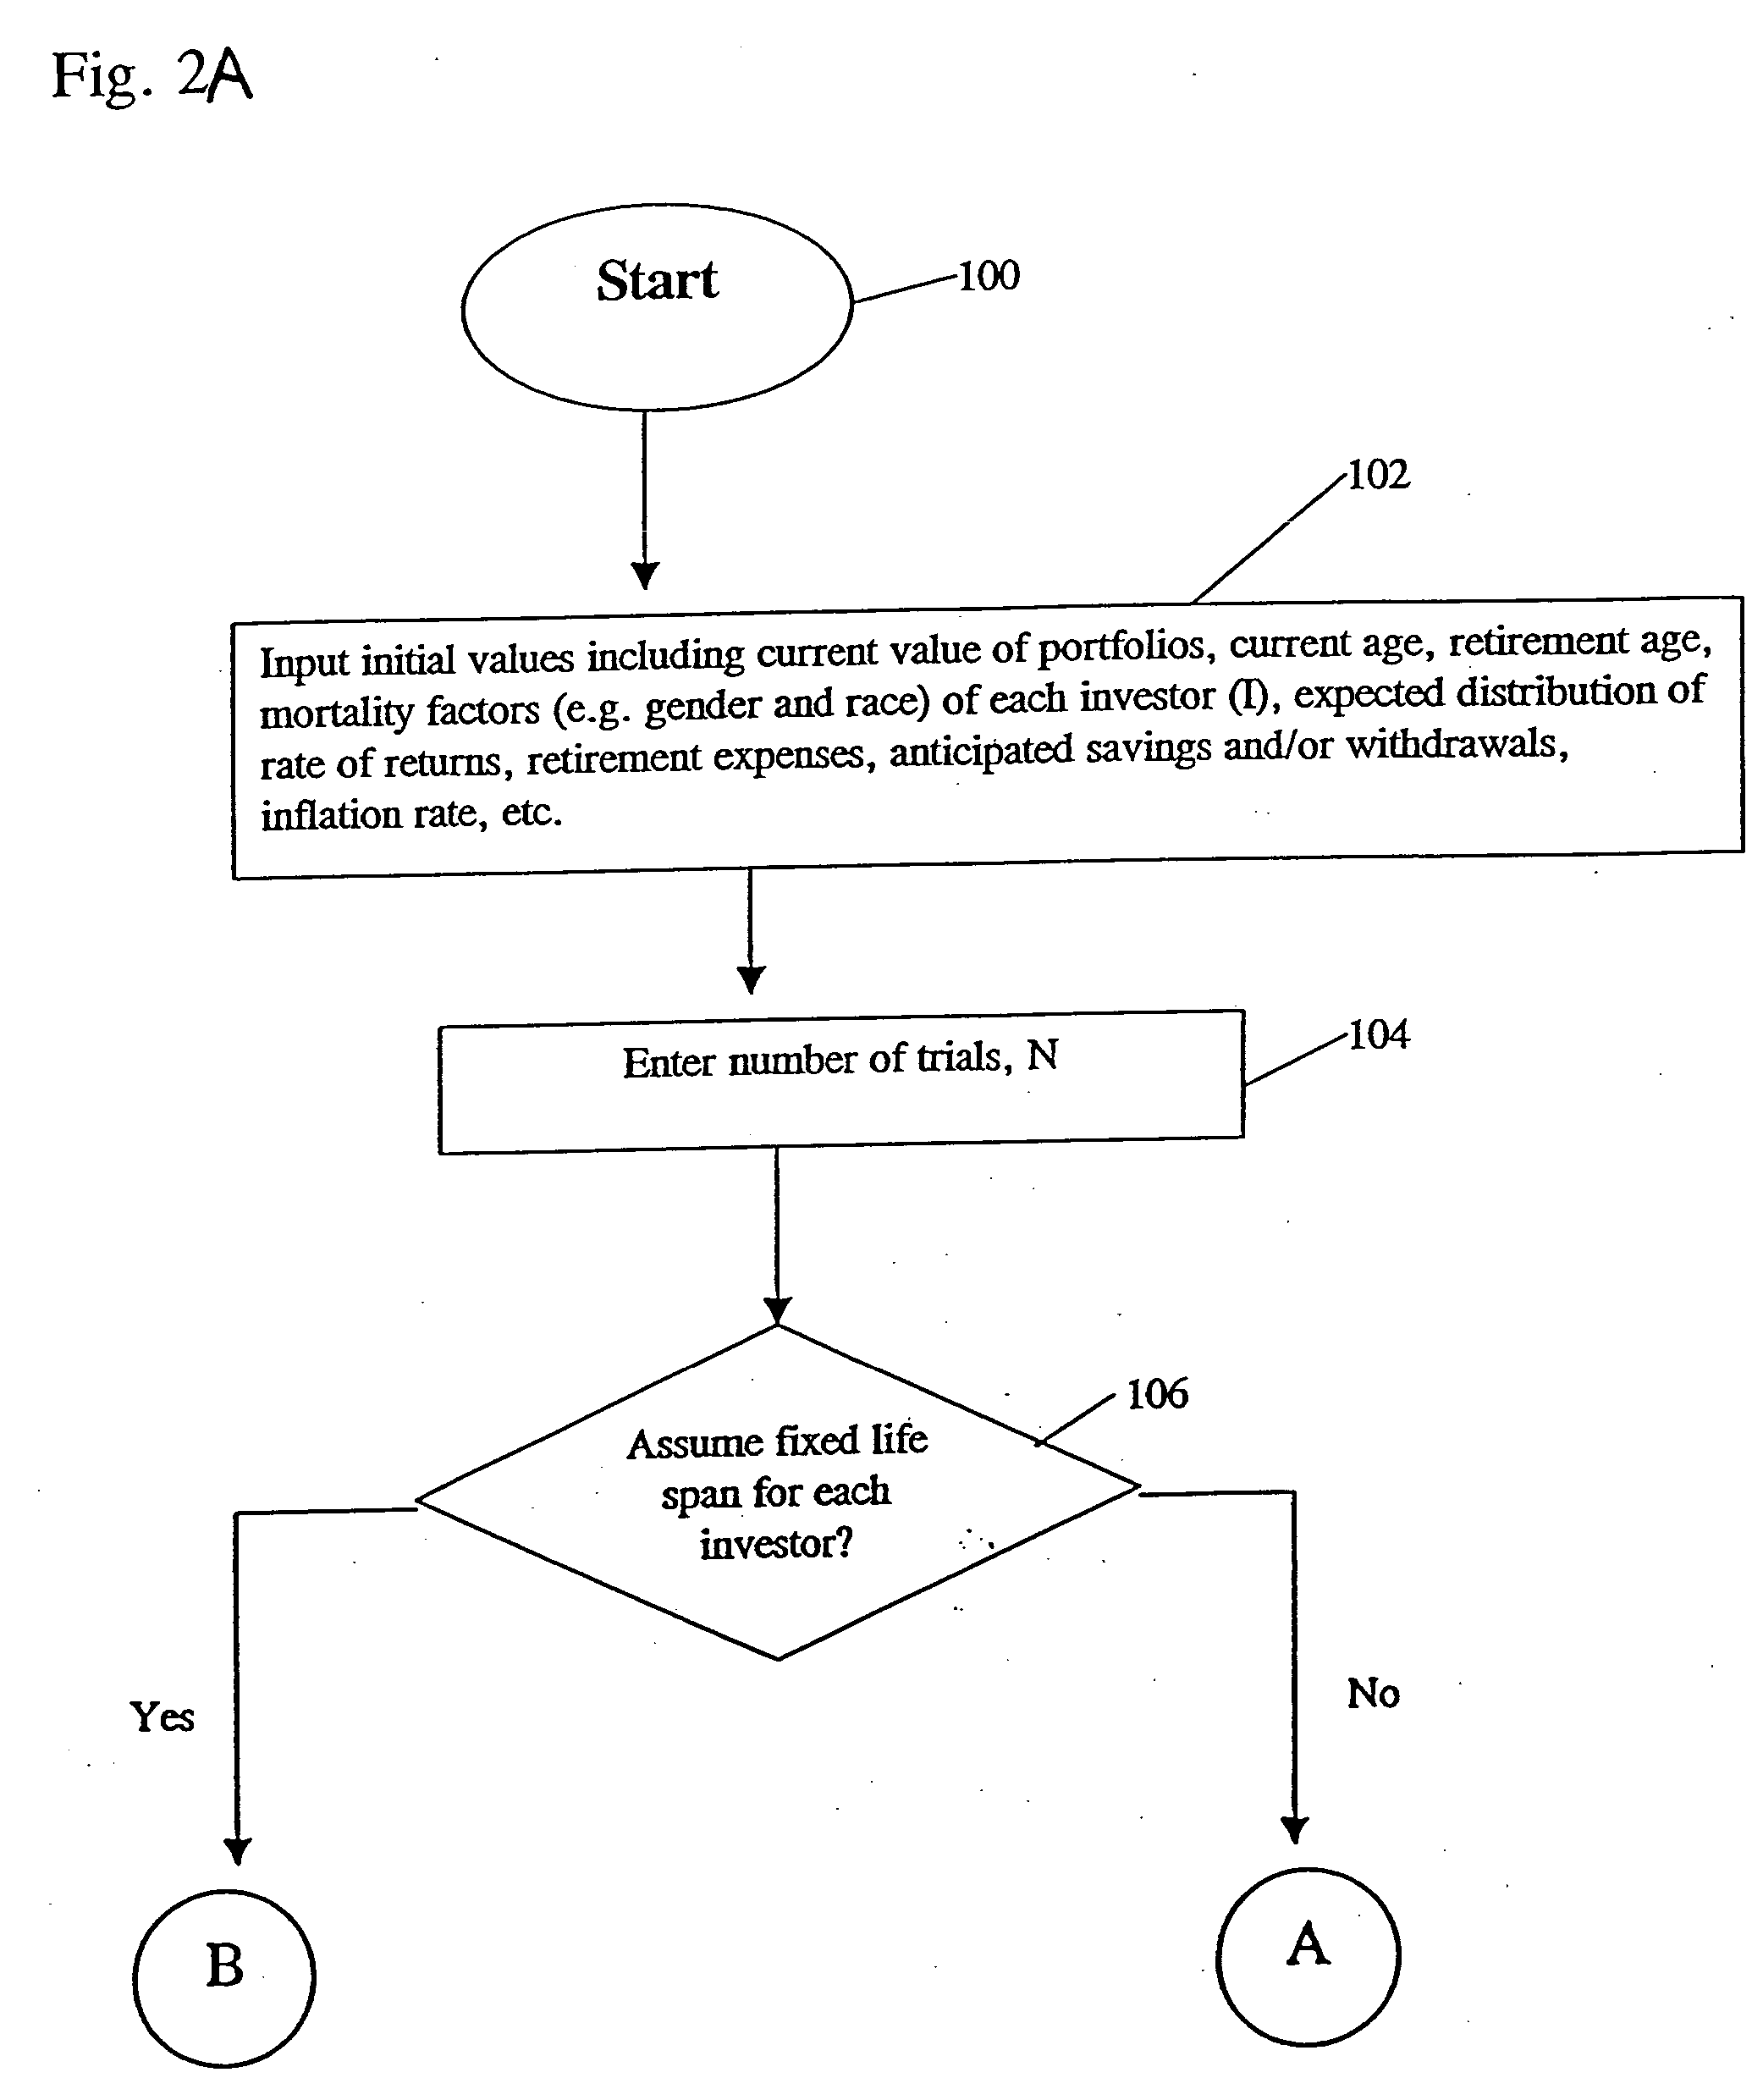 System and method for incorporating mortality risk in an investment planning model